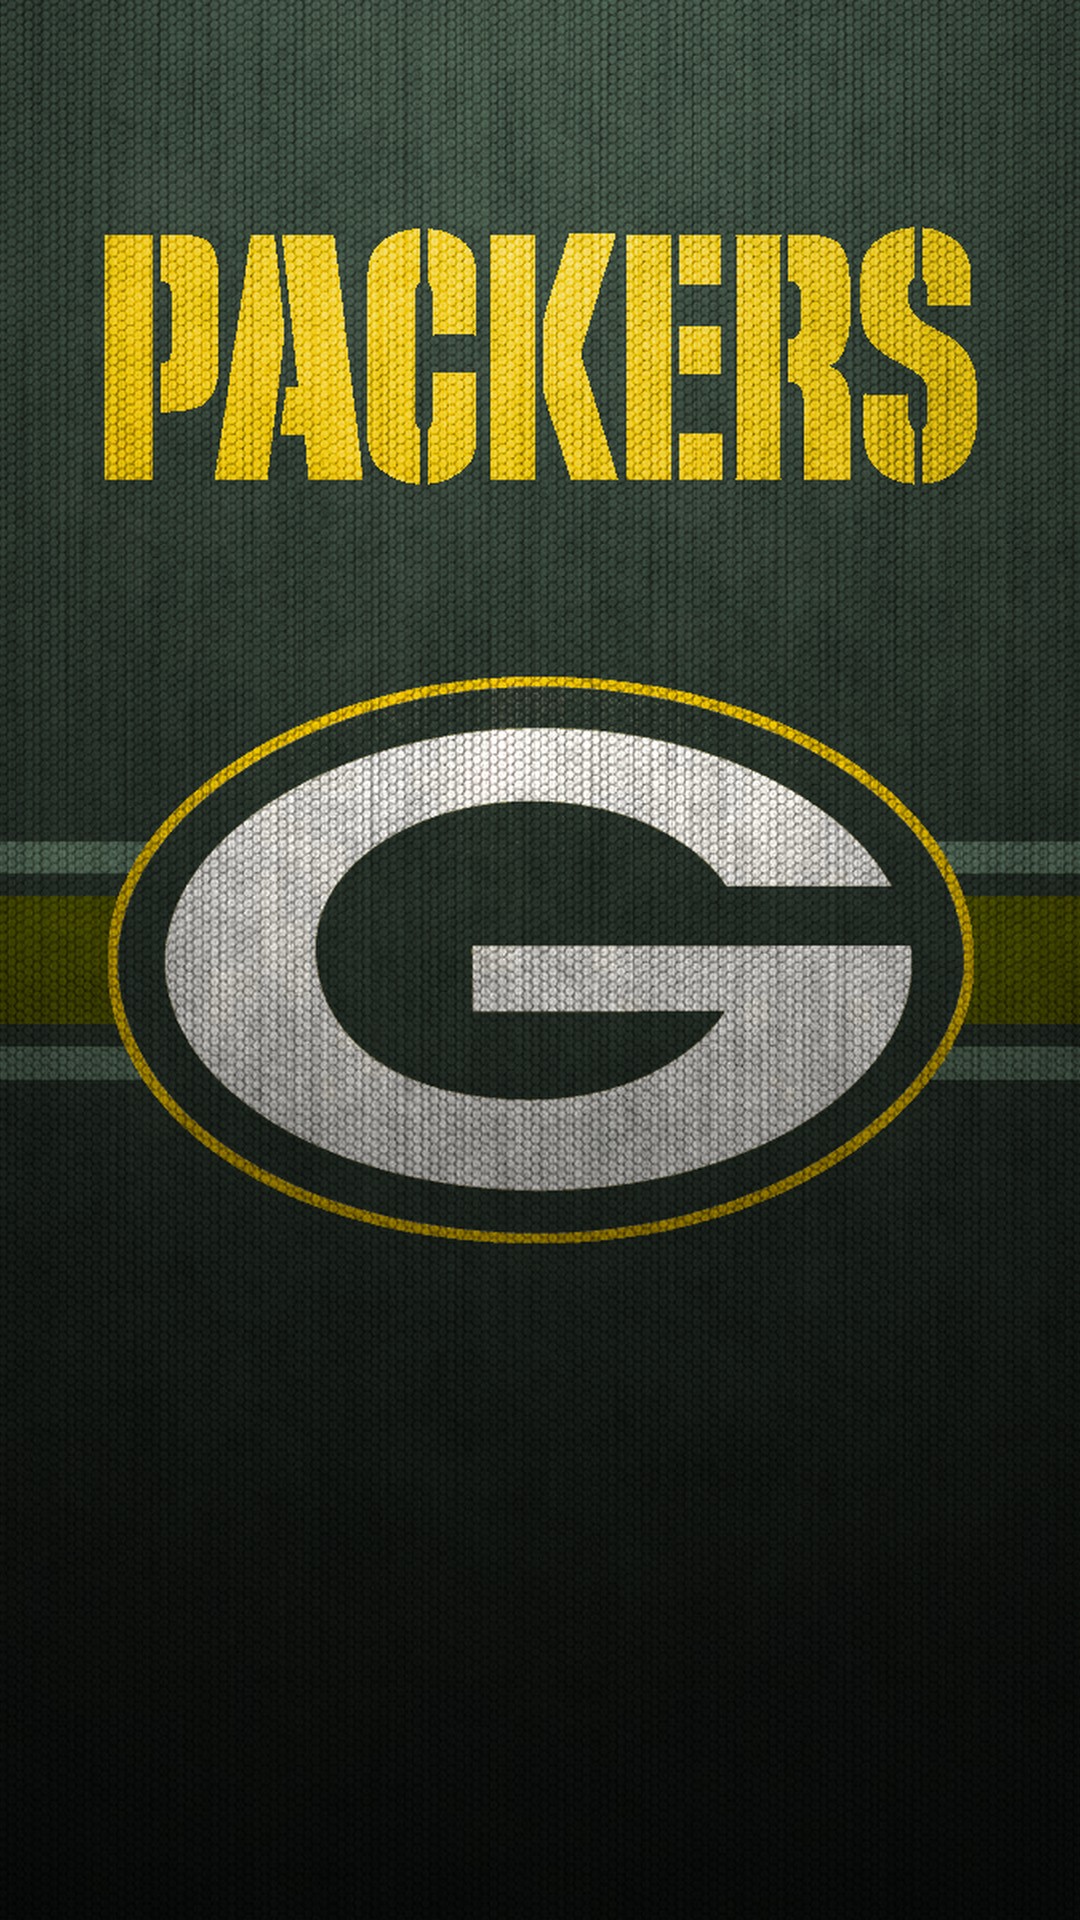 Green Bay Packers iPhone Wallpaper Lock Screen with high-resolution 1080x1920 pixel. Download and set as wallpaper for Apple iPhone X, XS Max, XR, 8, 7, 6, SE, iPad, Android